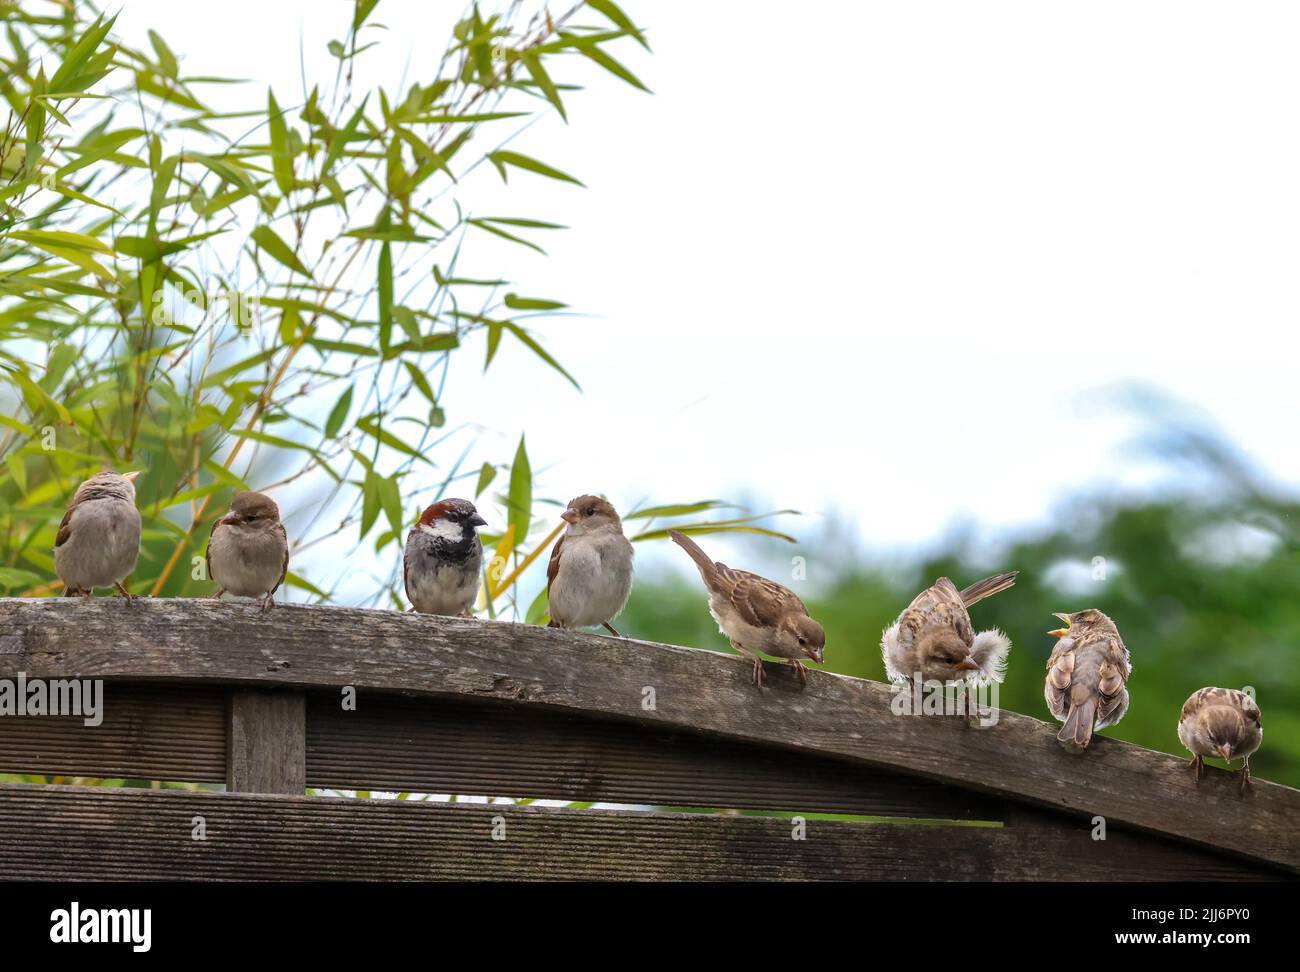 House Sparrows 'Passer domesticus' in a row on garden fence. Eight birds with cute baby chicks or fledglings and fluffy feathers. Dublin, Ireland Stock Photo